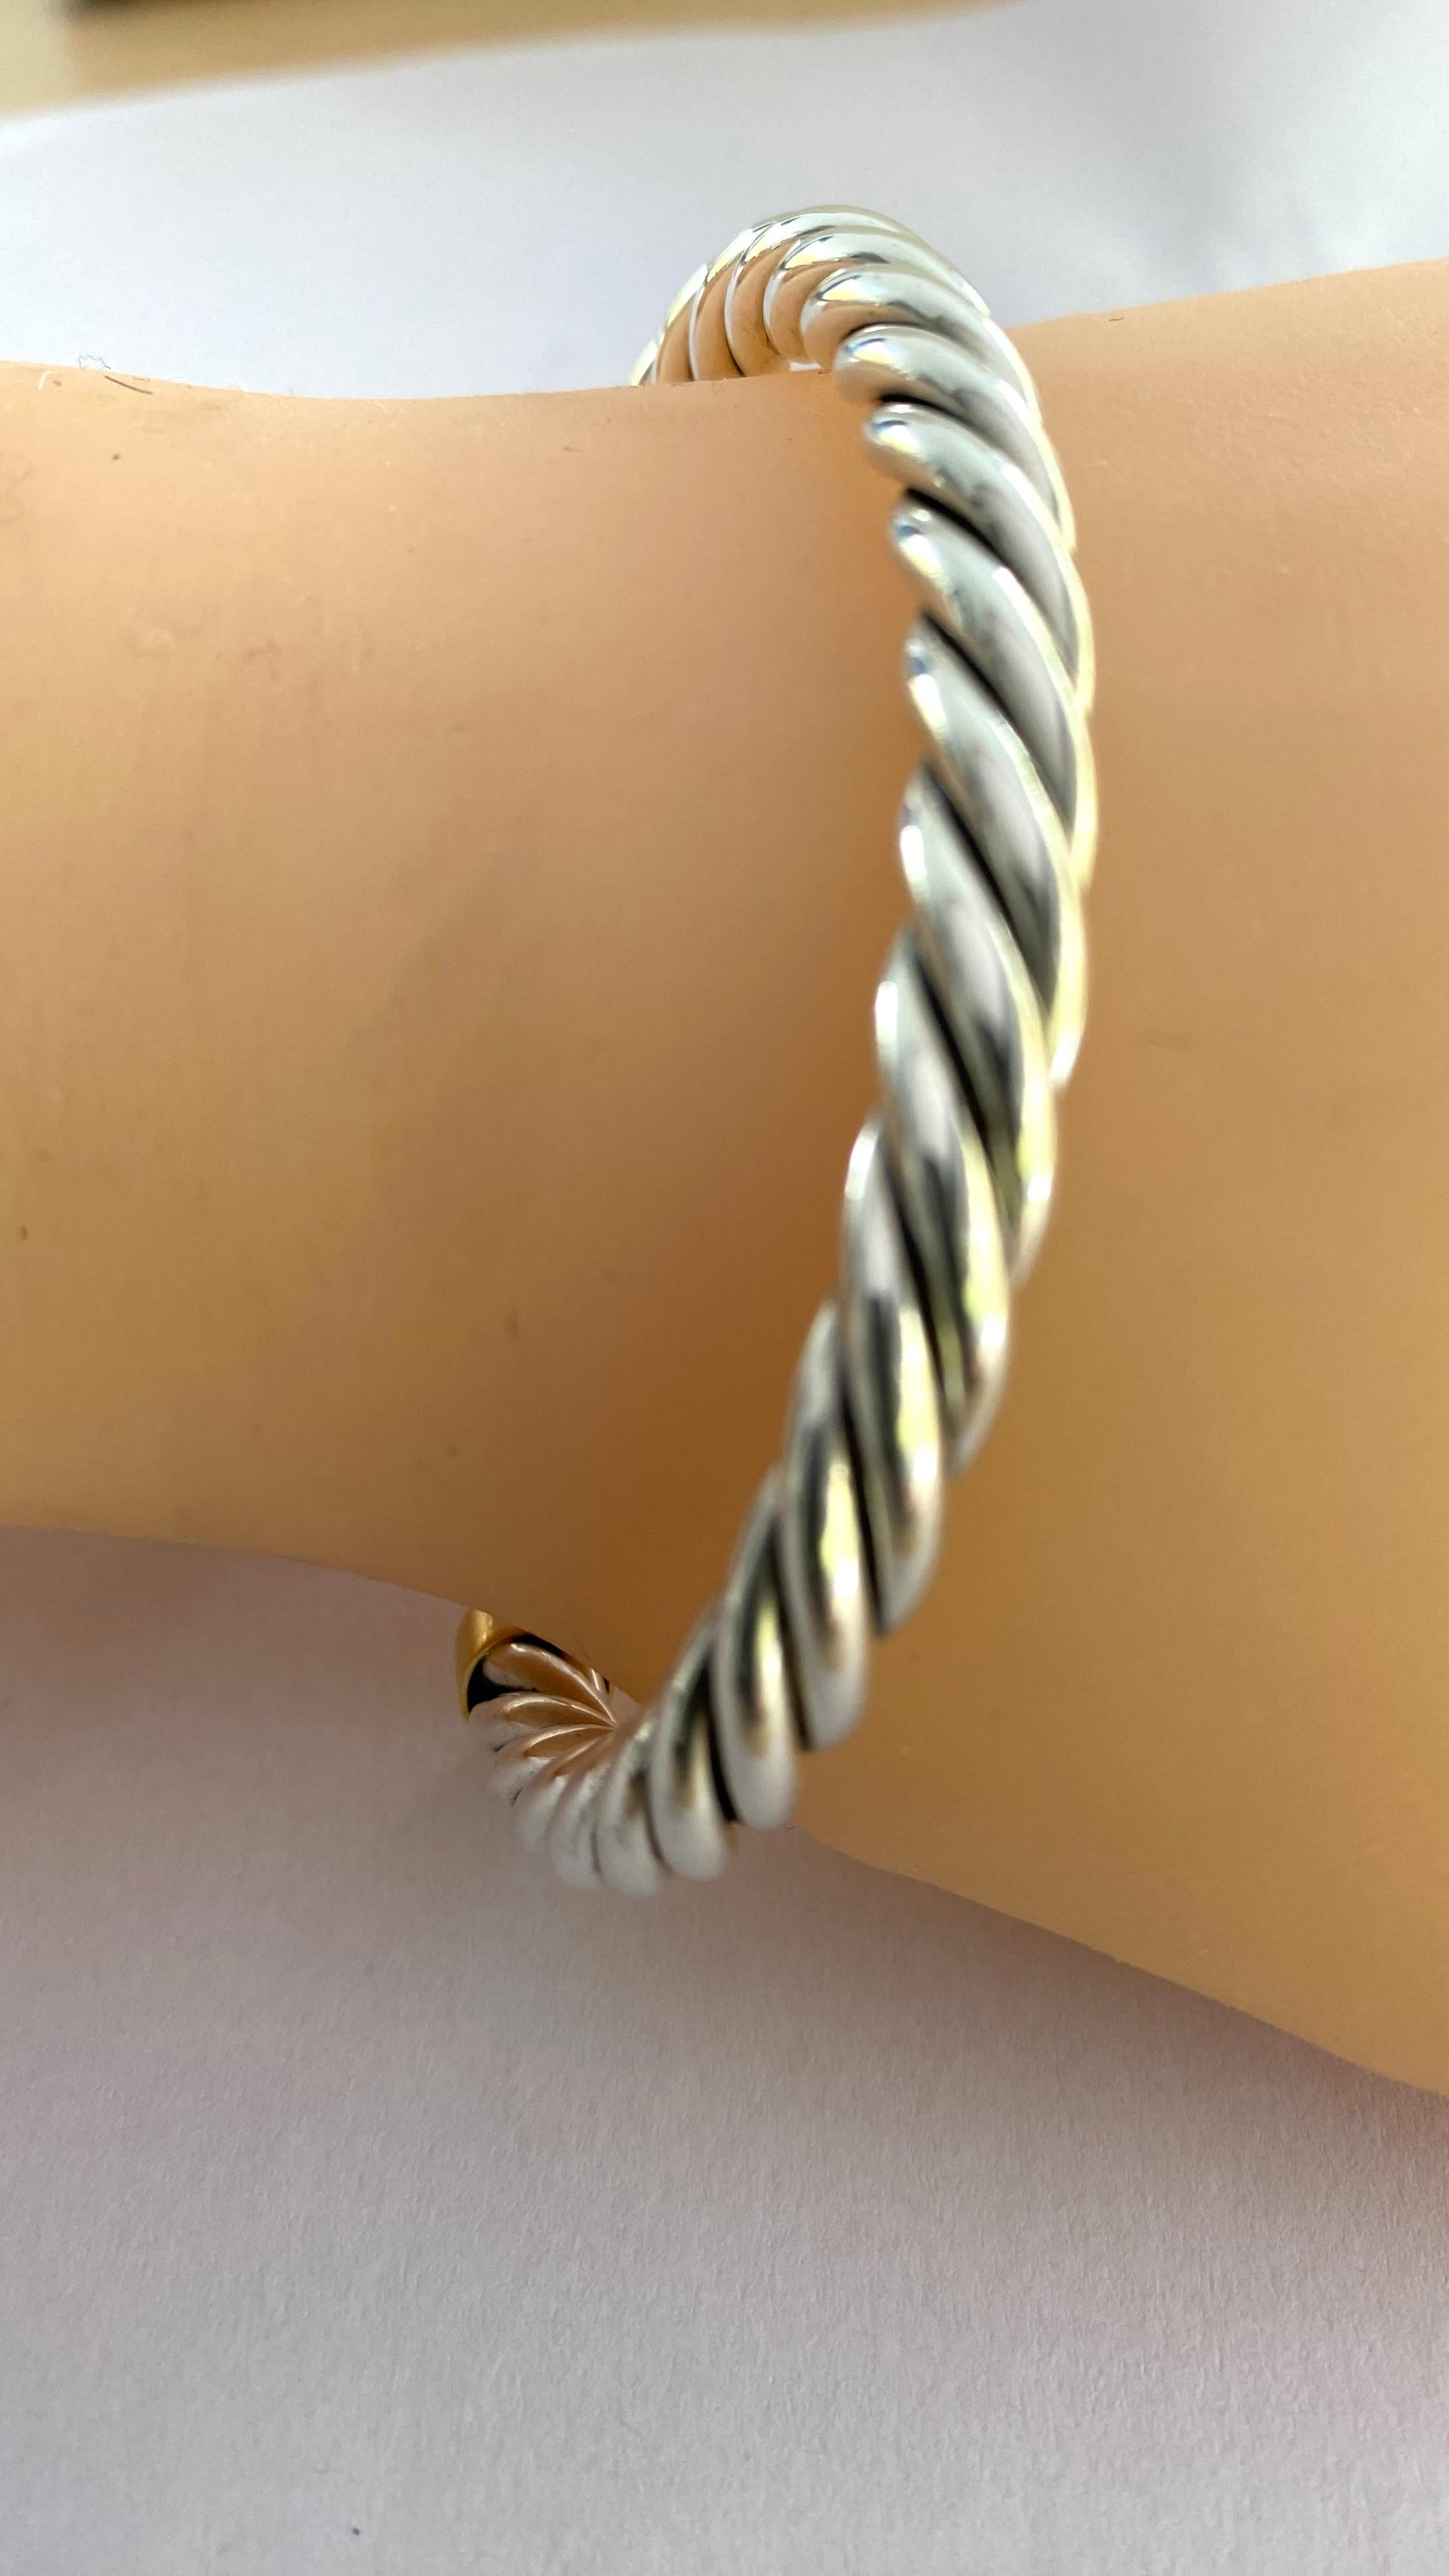 Vintage David Yurman Braided Braided Bracelet in 18K Gold and Sterling Silver For Sale 2